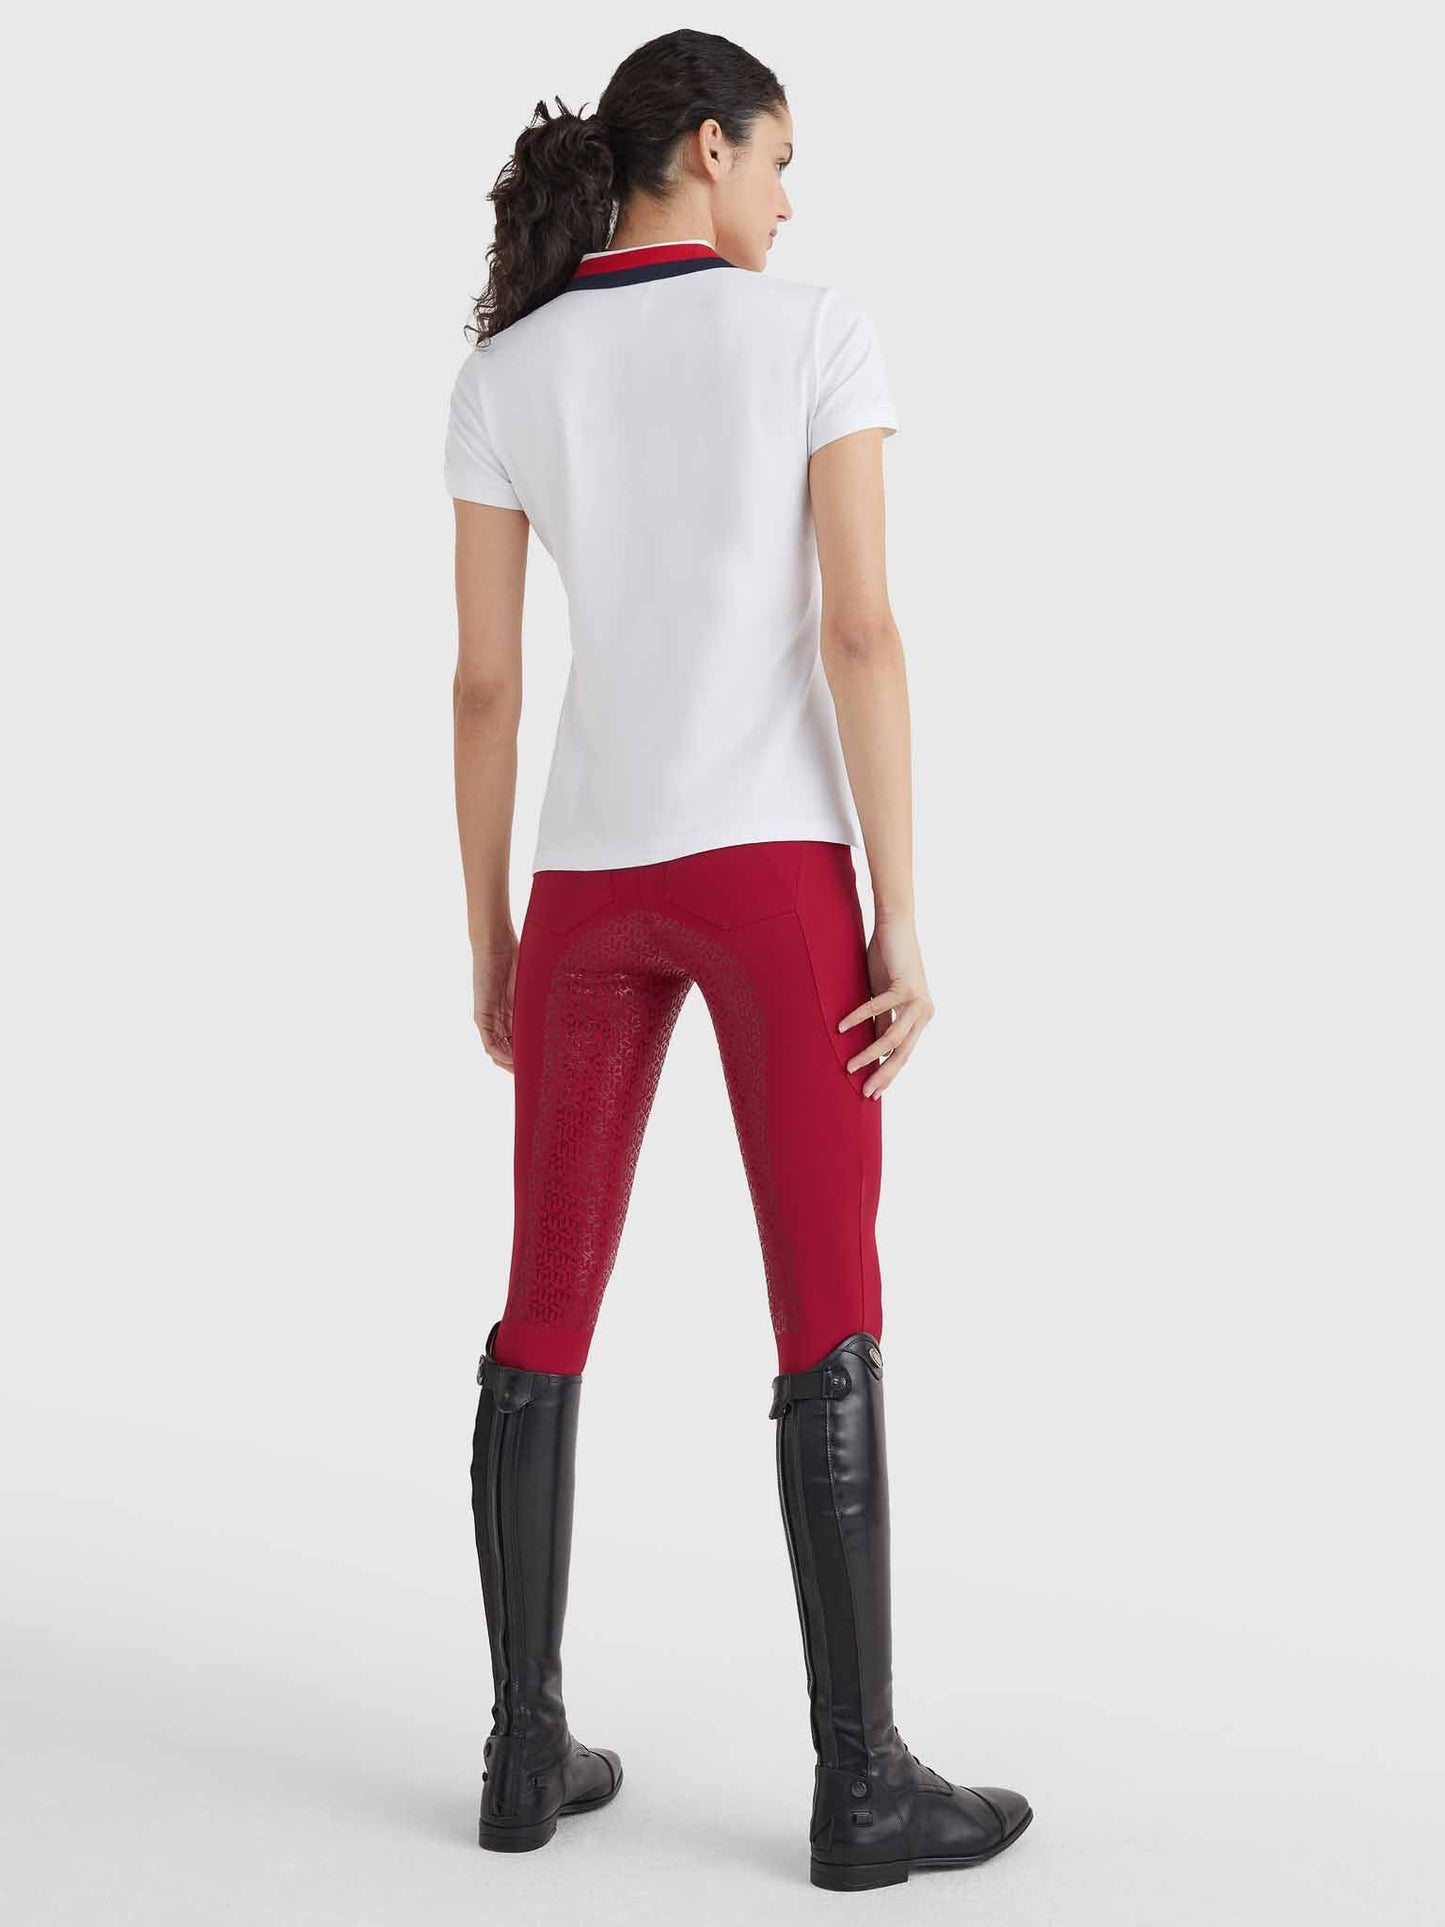 Polo Style, col liseré Ruban, Optic White - Tommy Hilfiger Equestrian SS22